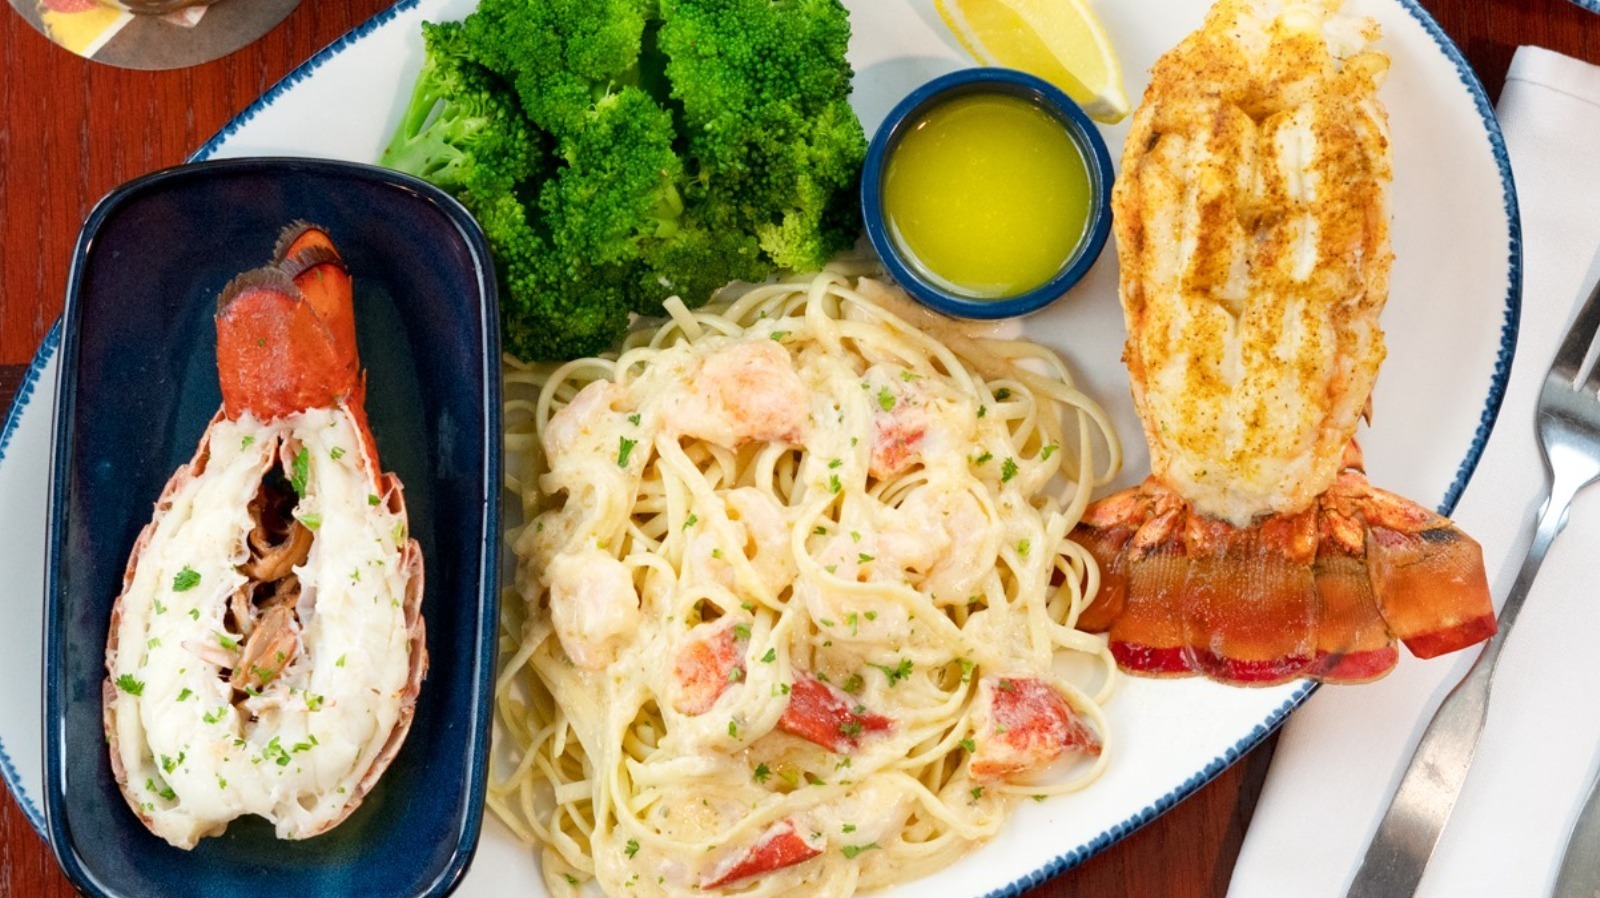 Red Lobster's New Lobsterfest Lineup Just Got Even Fishier